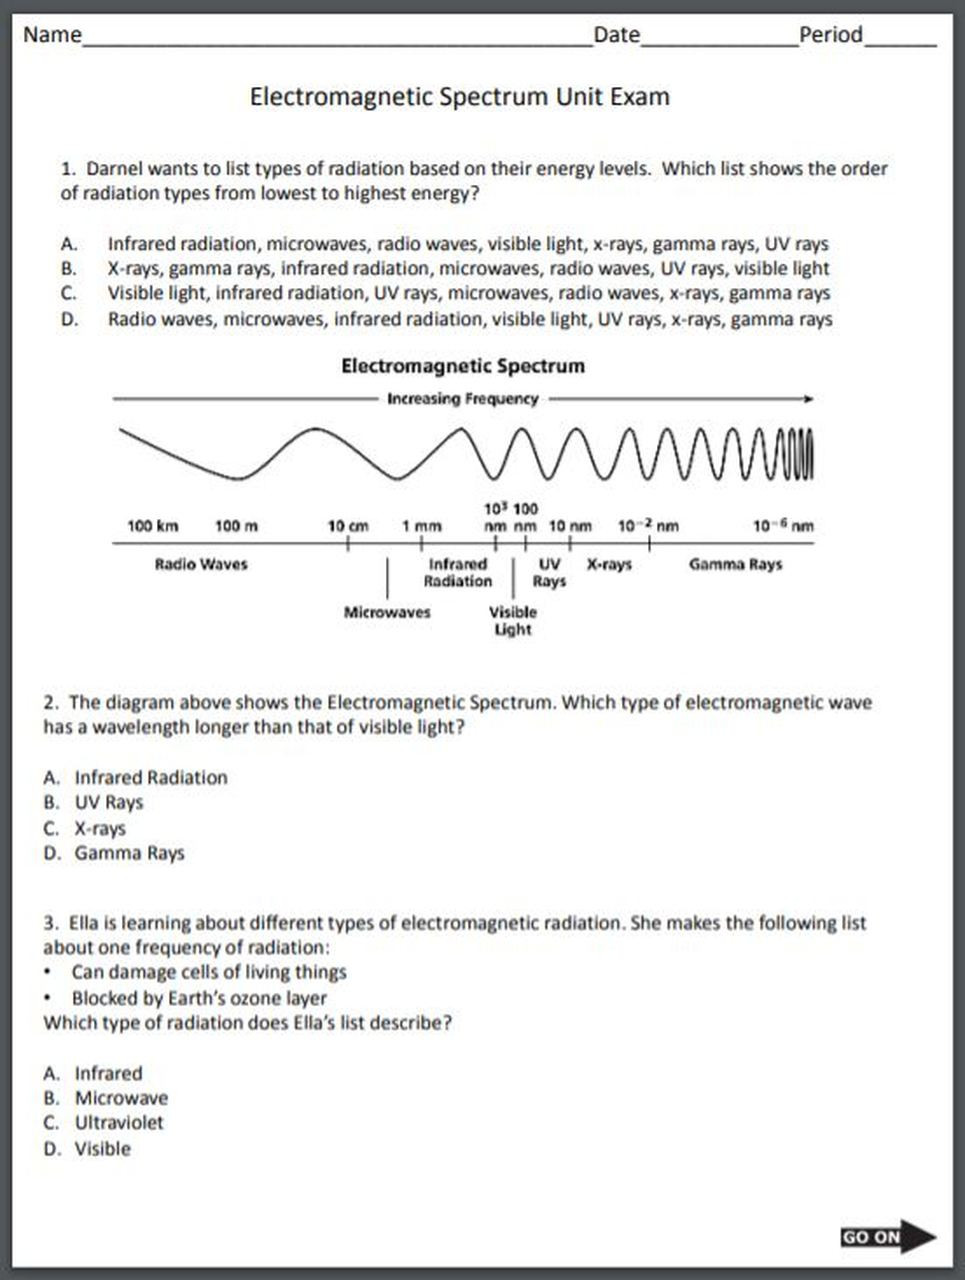 The Electromagnetic Spectrum Worksheet Answers Electromagnetic Spectrum Unit Exam